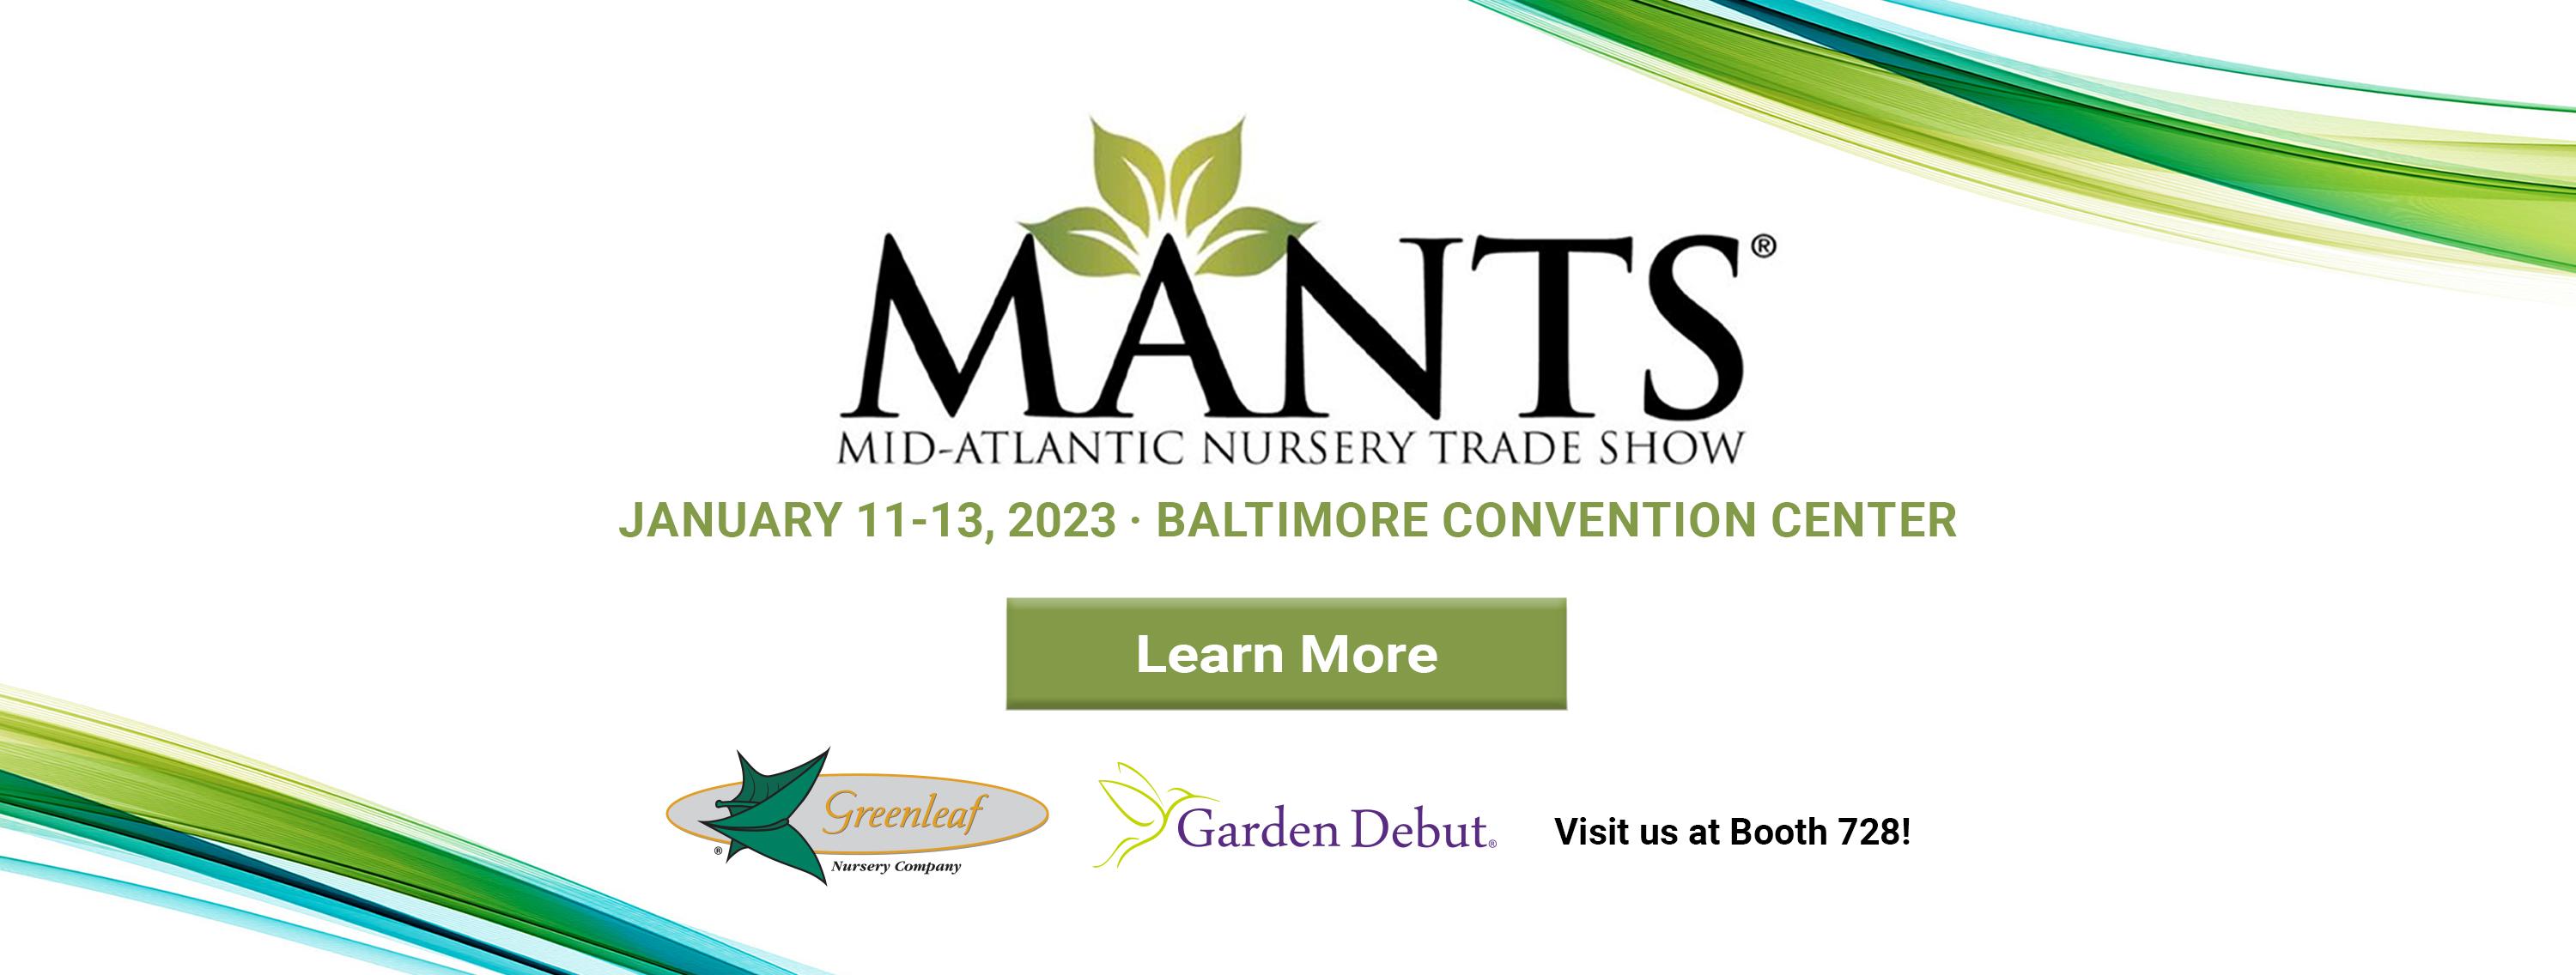 Click here to learn about the MANTS trade show.